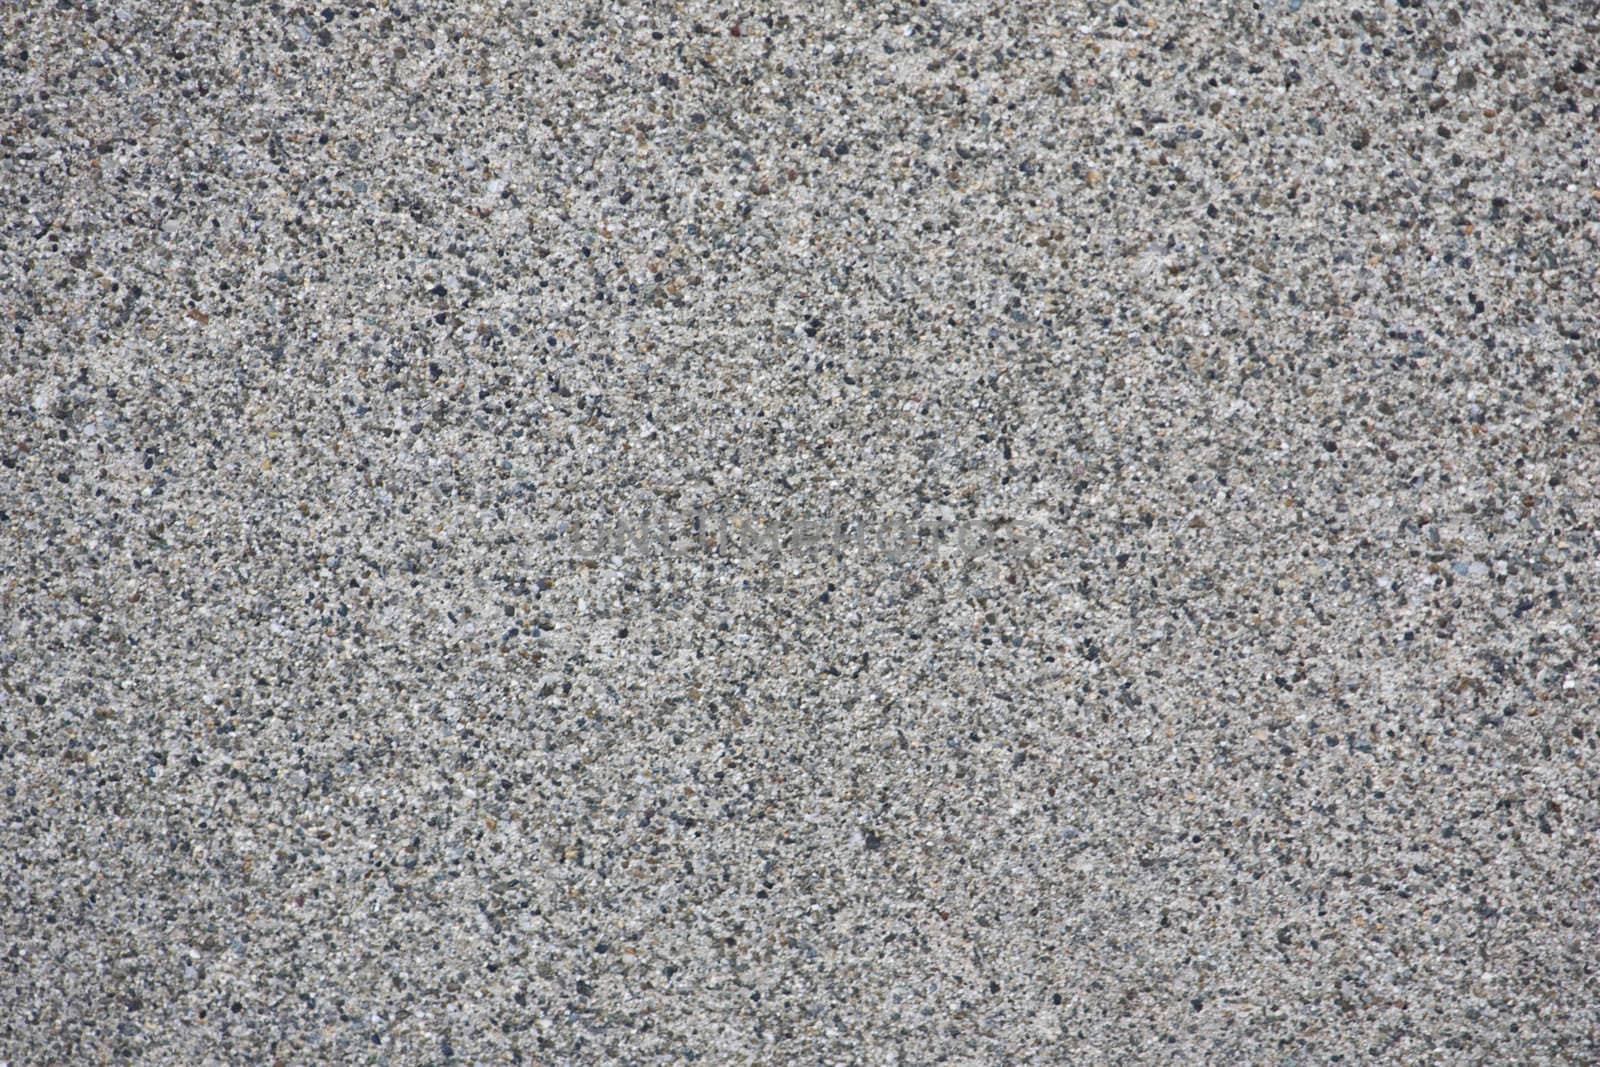 Sandy Coarse Grey Grit Grunge Rough Texture Background or Wall Paper. Also looks like static or tv signal noise. 